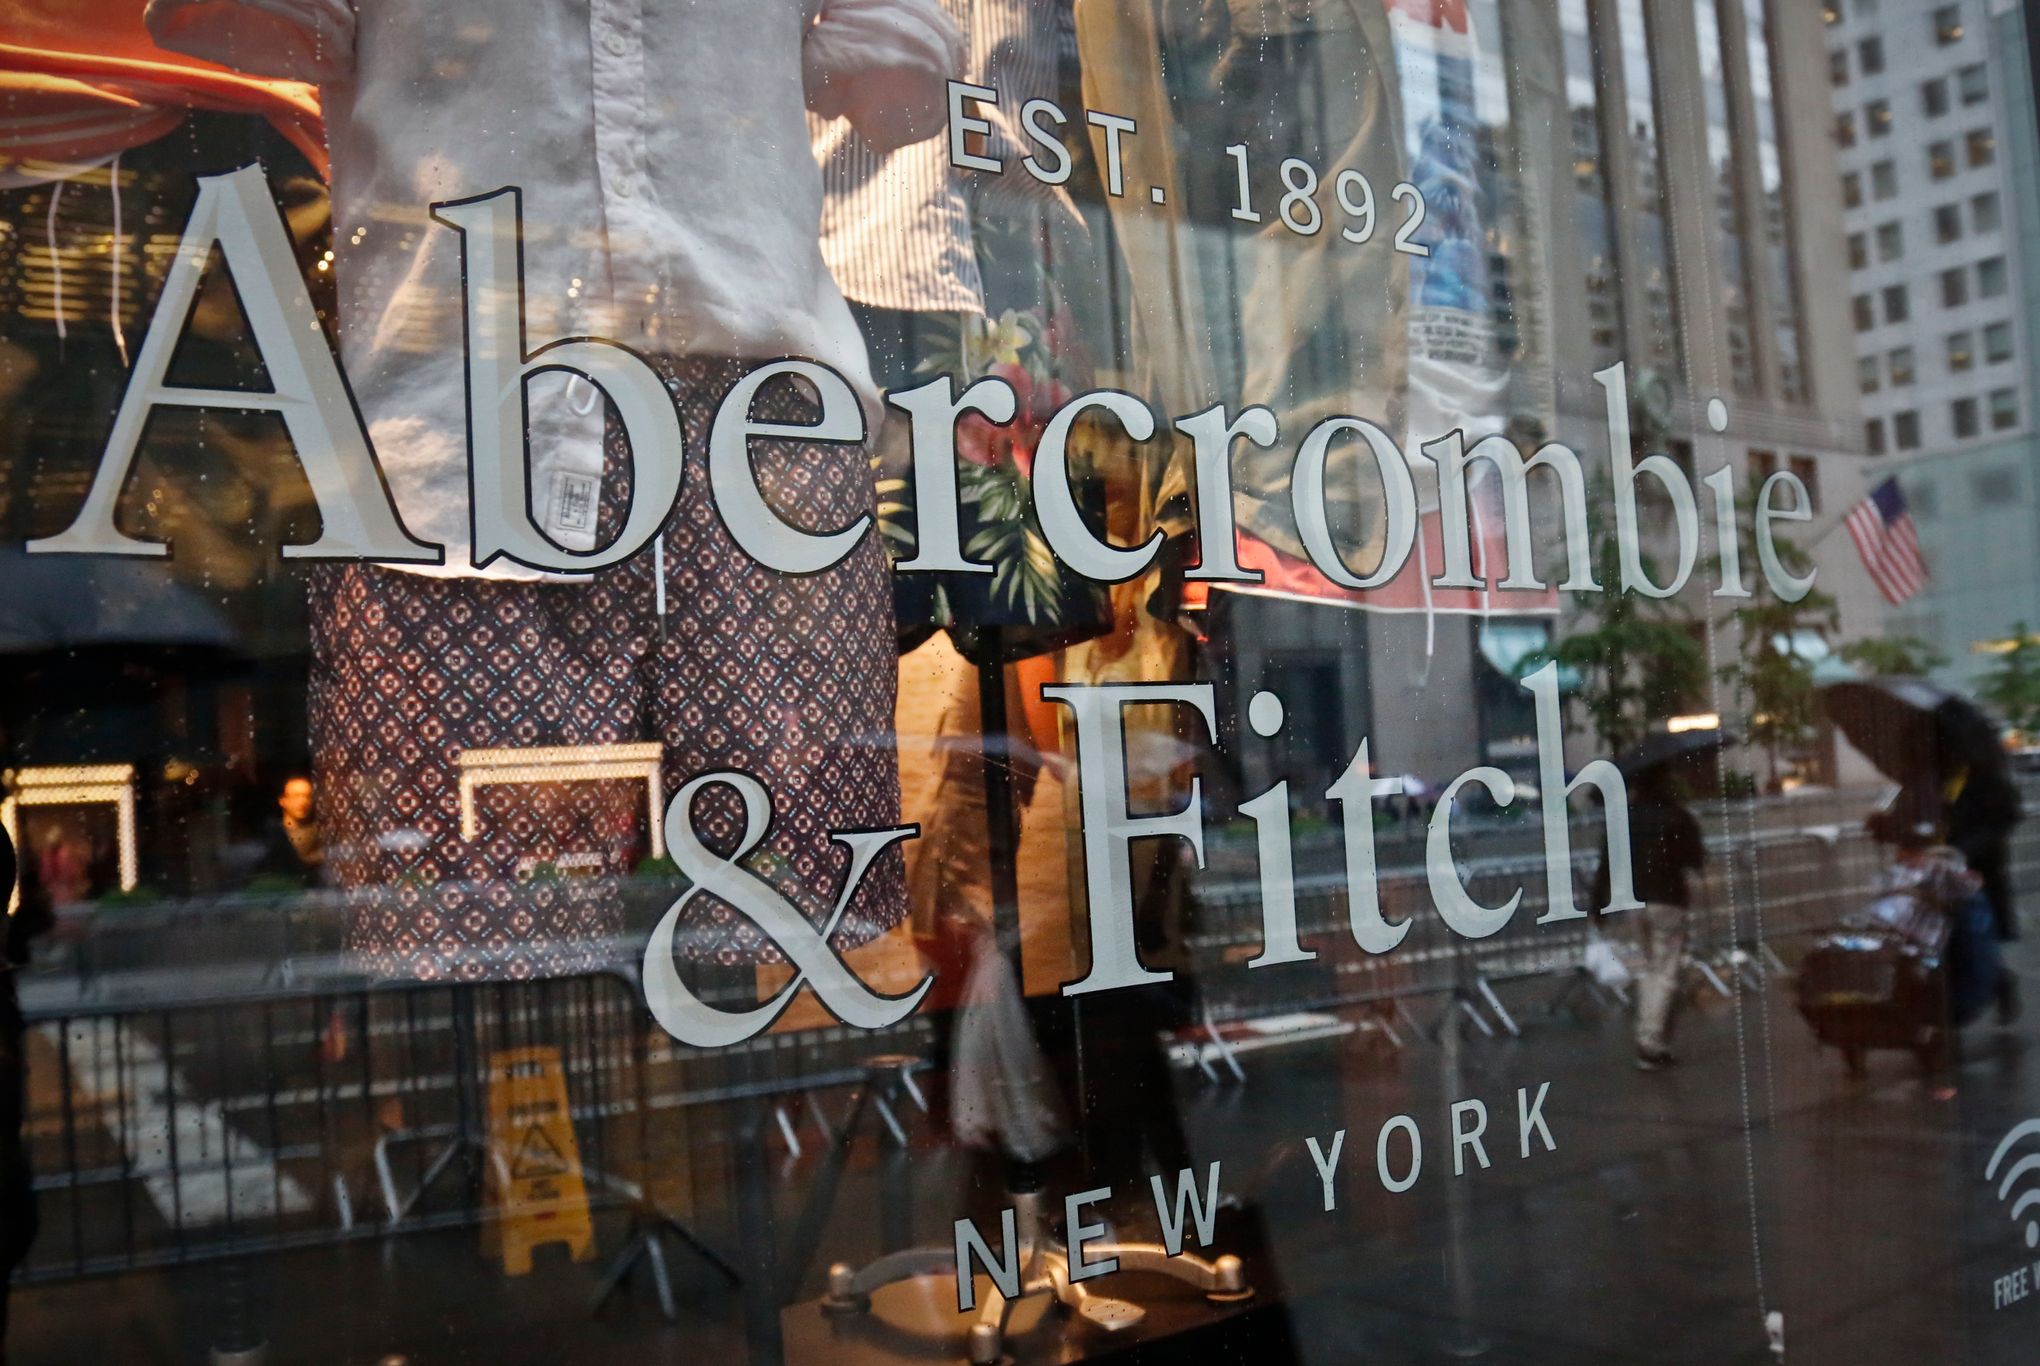 Abercrombie reports narrower loss, helped by Hollister brand